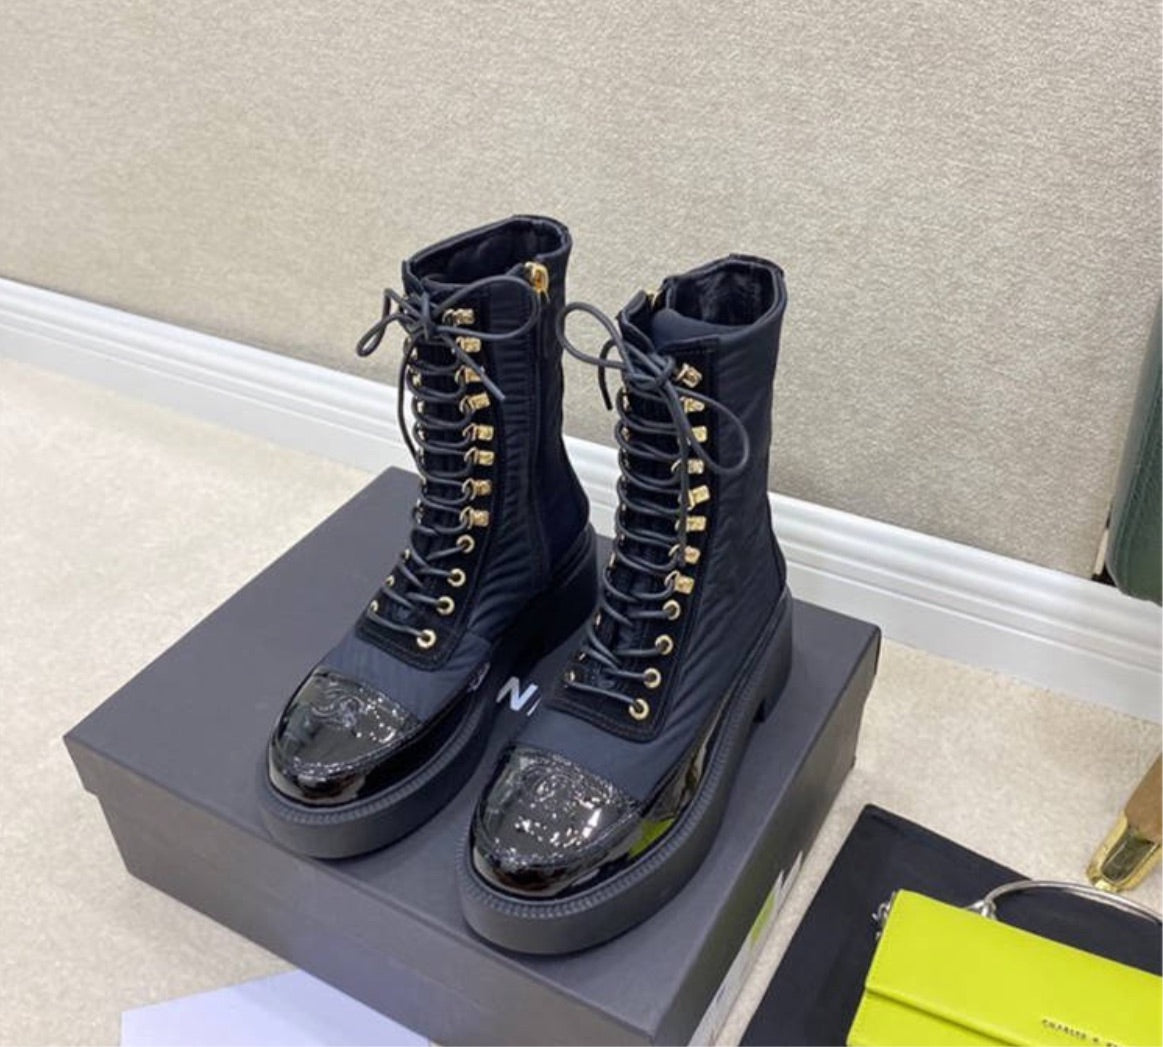 New Chanel Boots – Forever Edgy